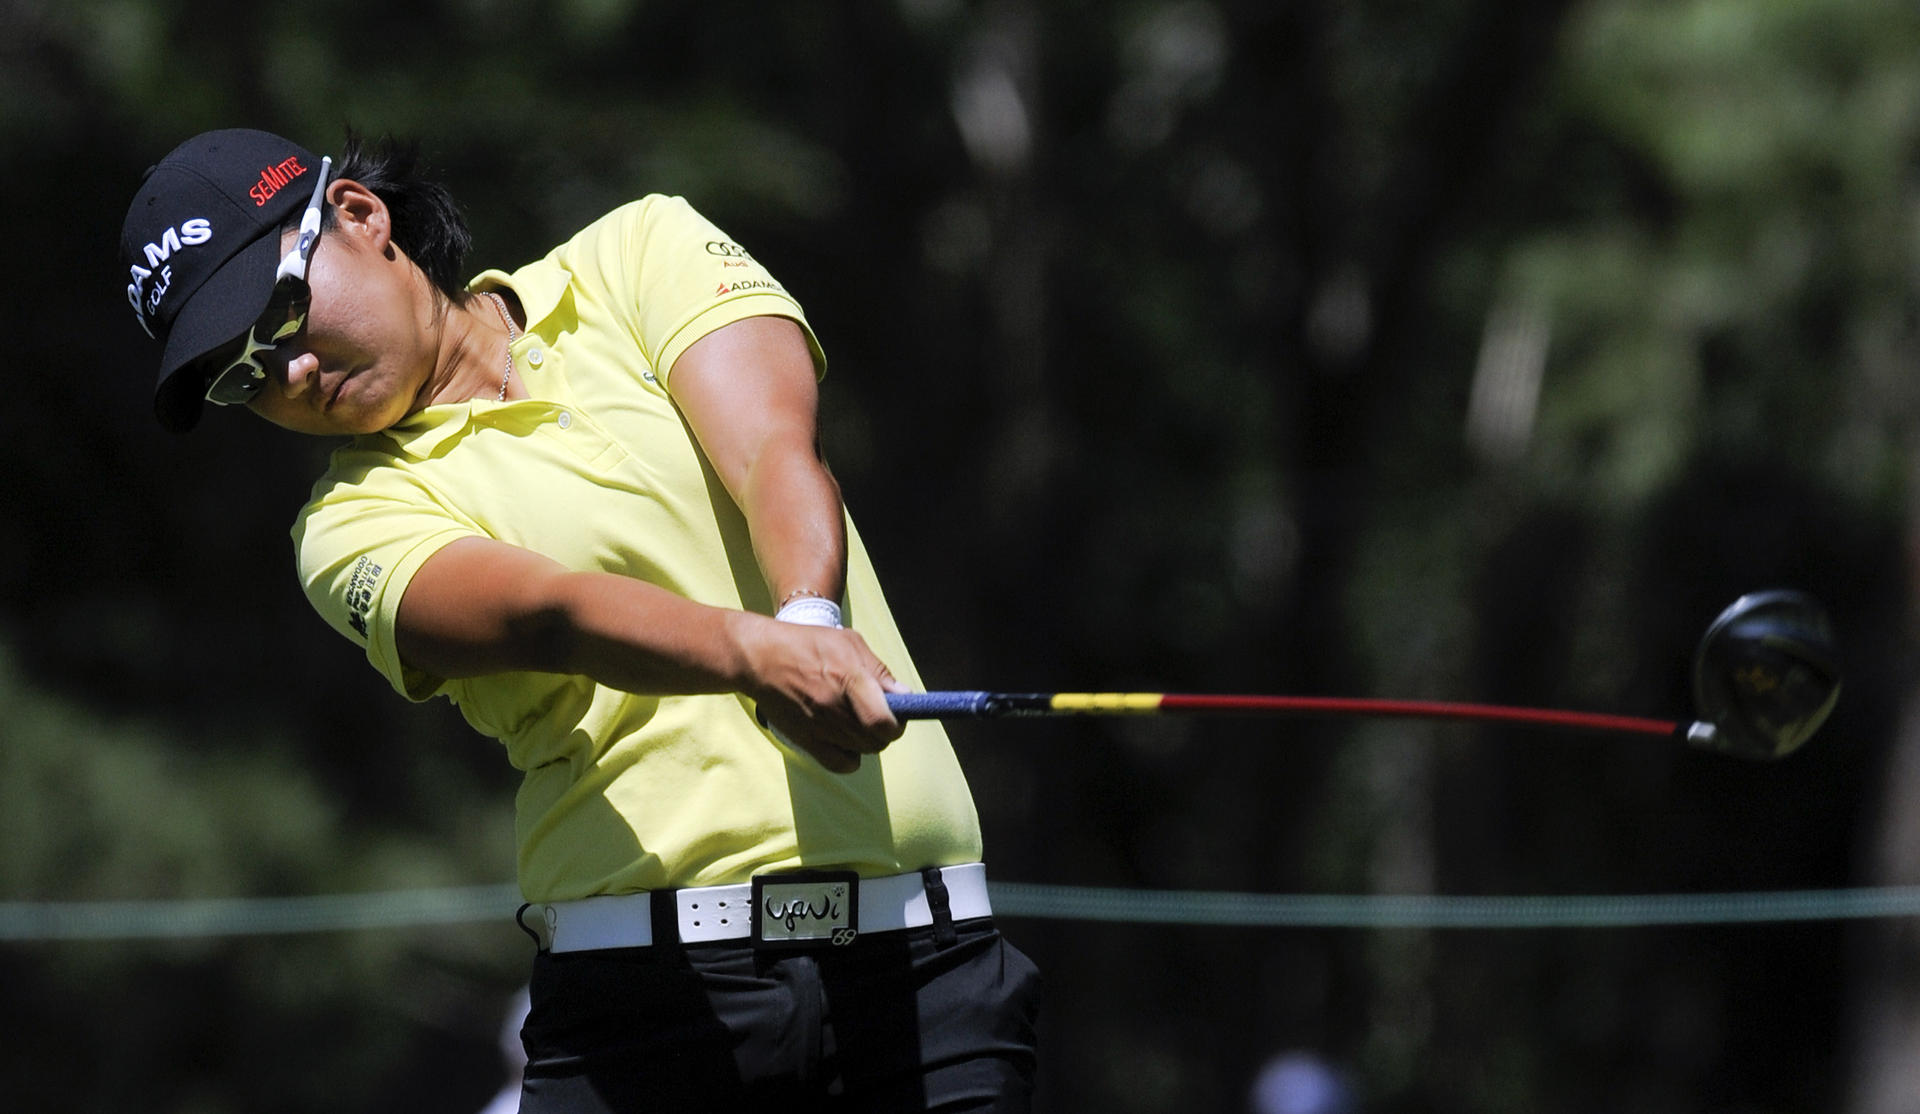 Taiwanese golfer Tseng Ya-ni is struggling to regain the form she had from 2011 to 2013, but glimpses of her best have resurfaced in Beijing. Photo: AP